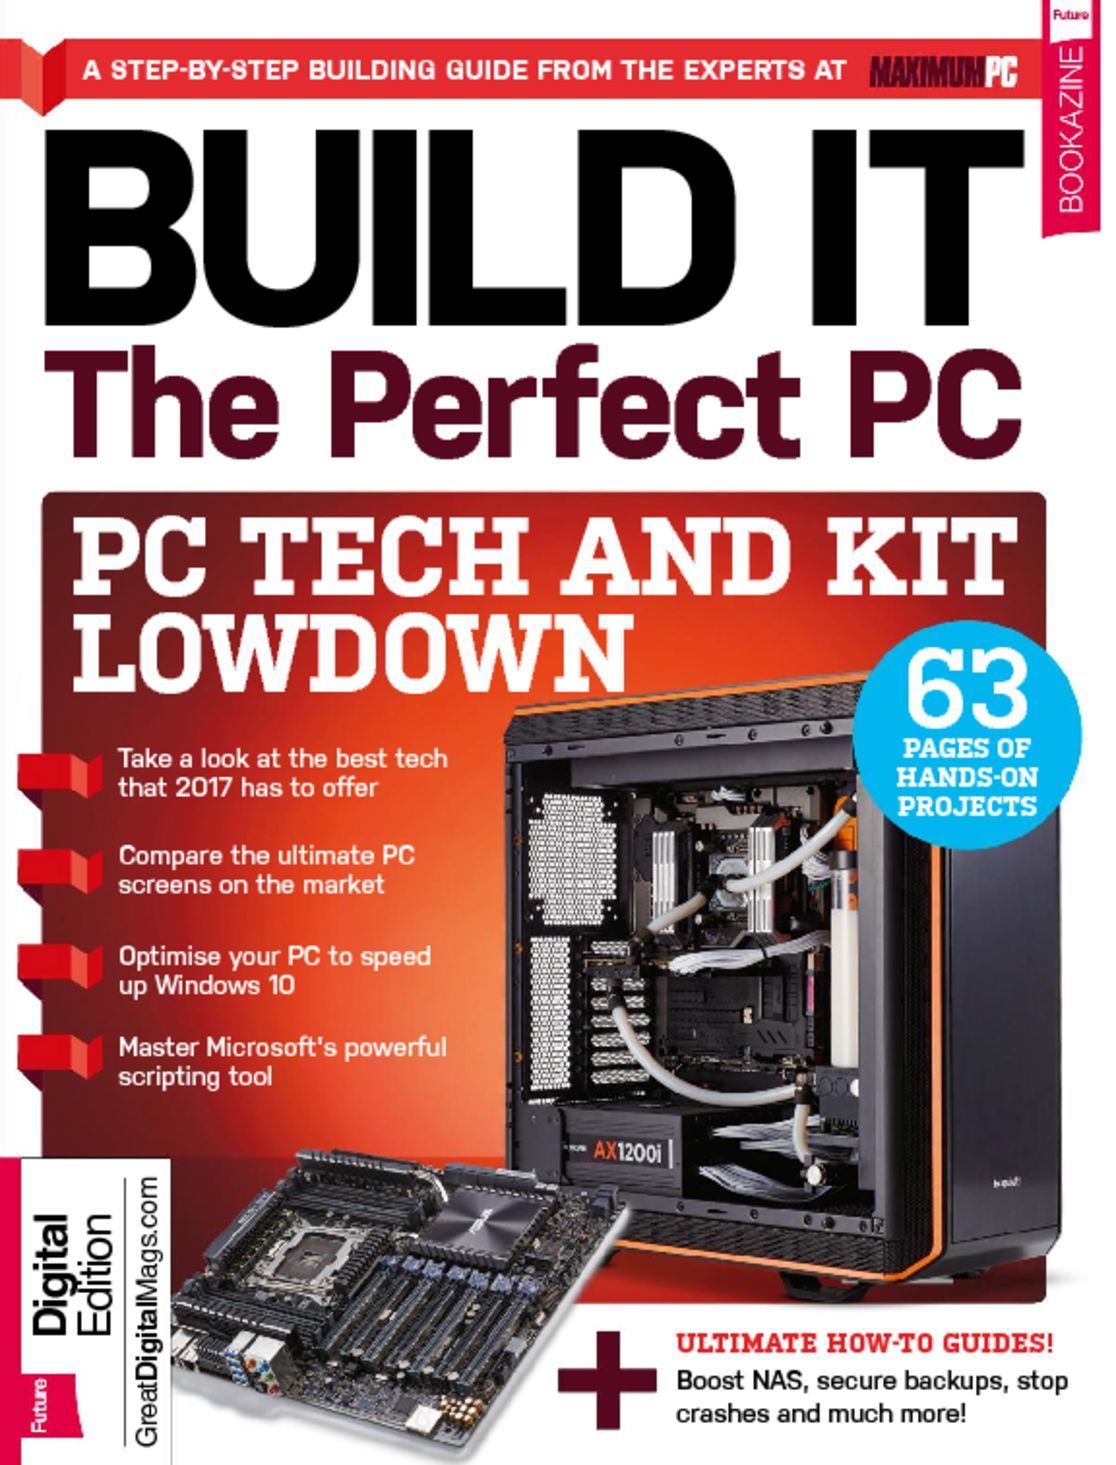 Maximum PC Specials - PC HOW-TO GUIDE Summer 2014 - SANET